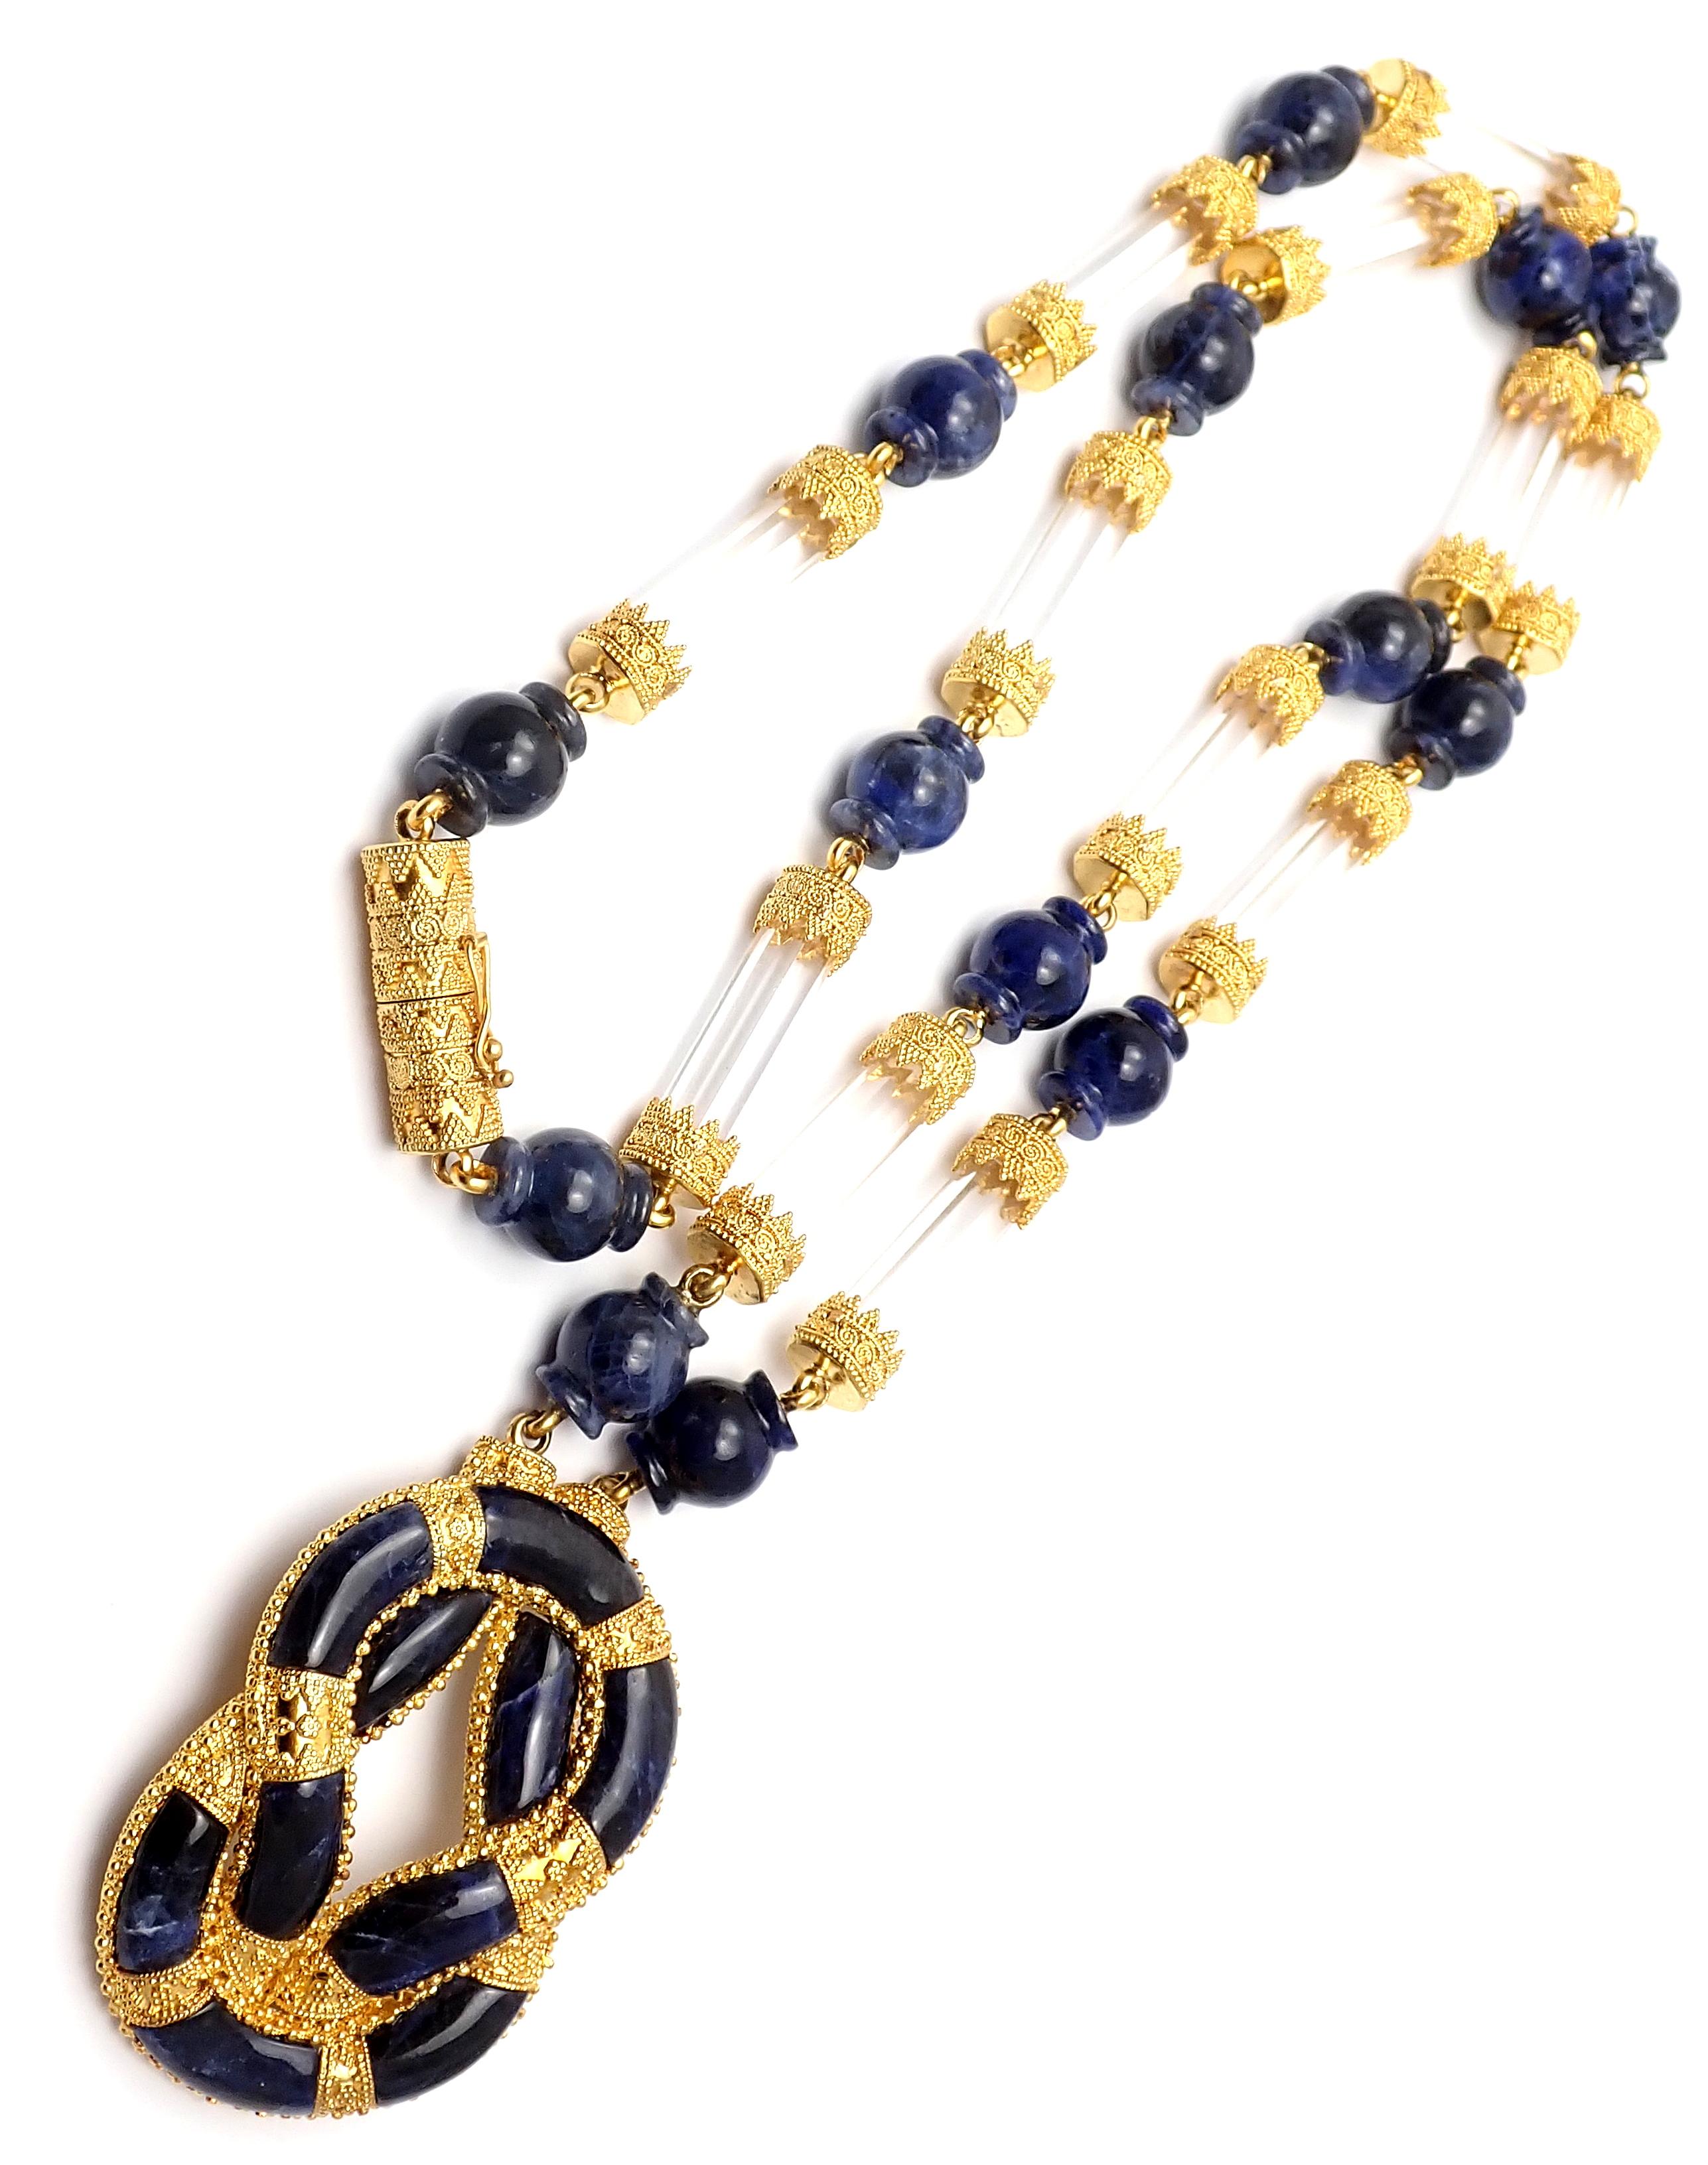 Women's or Men's Ilias Lalaounis Sodalite Rock Crystal Hercules Knot Yellow Gold Necklace